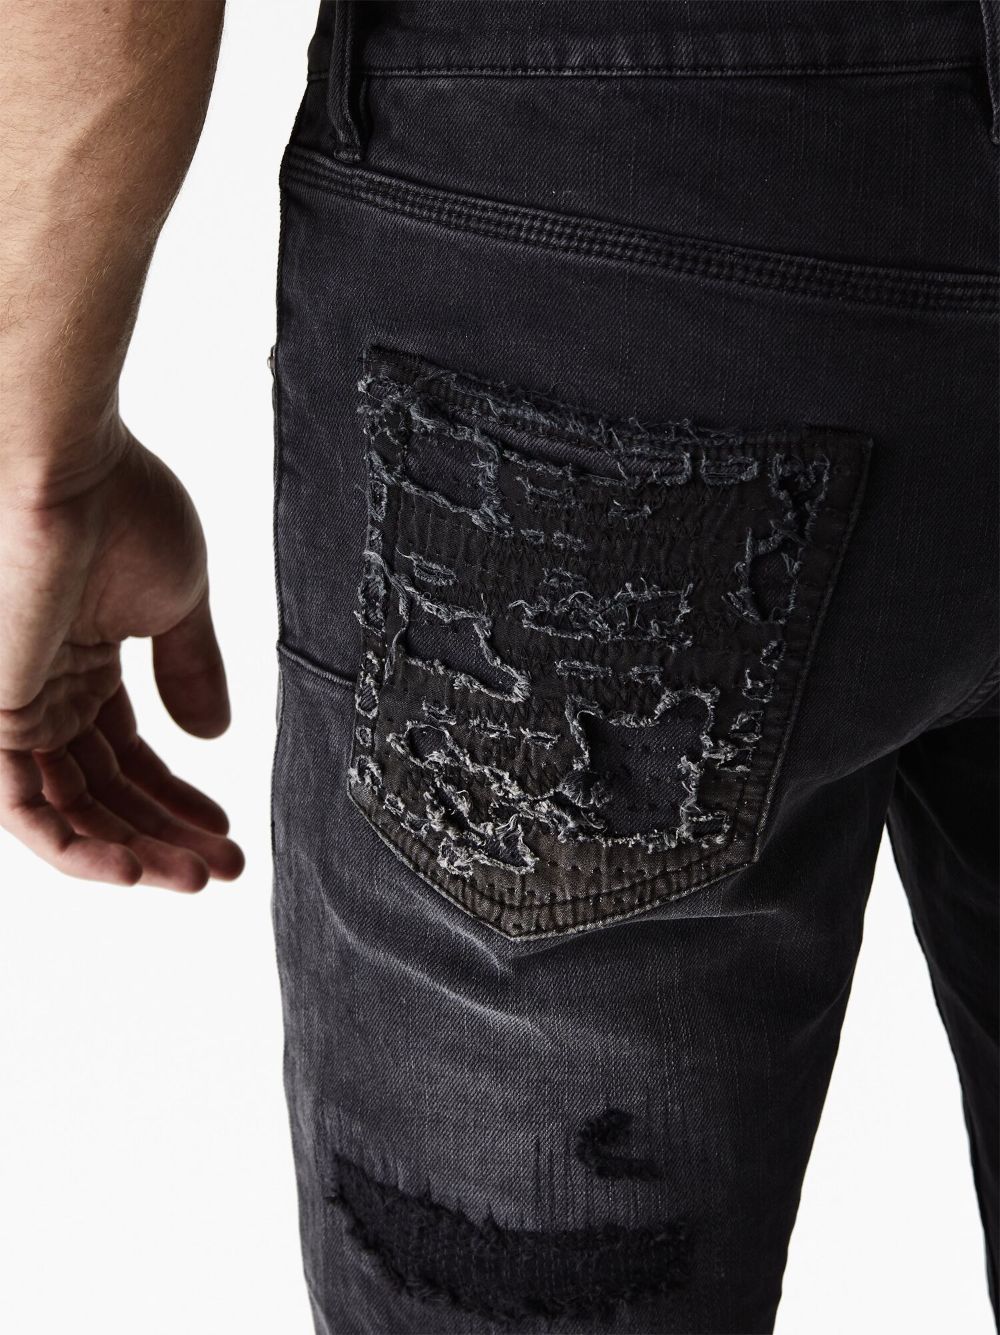 Purple Brand Quilted Destroyed Pocket black Jeans - Farfetch